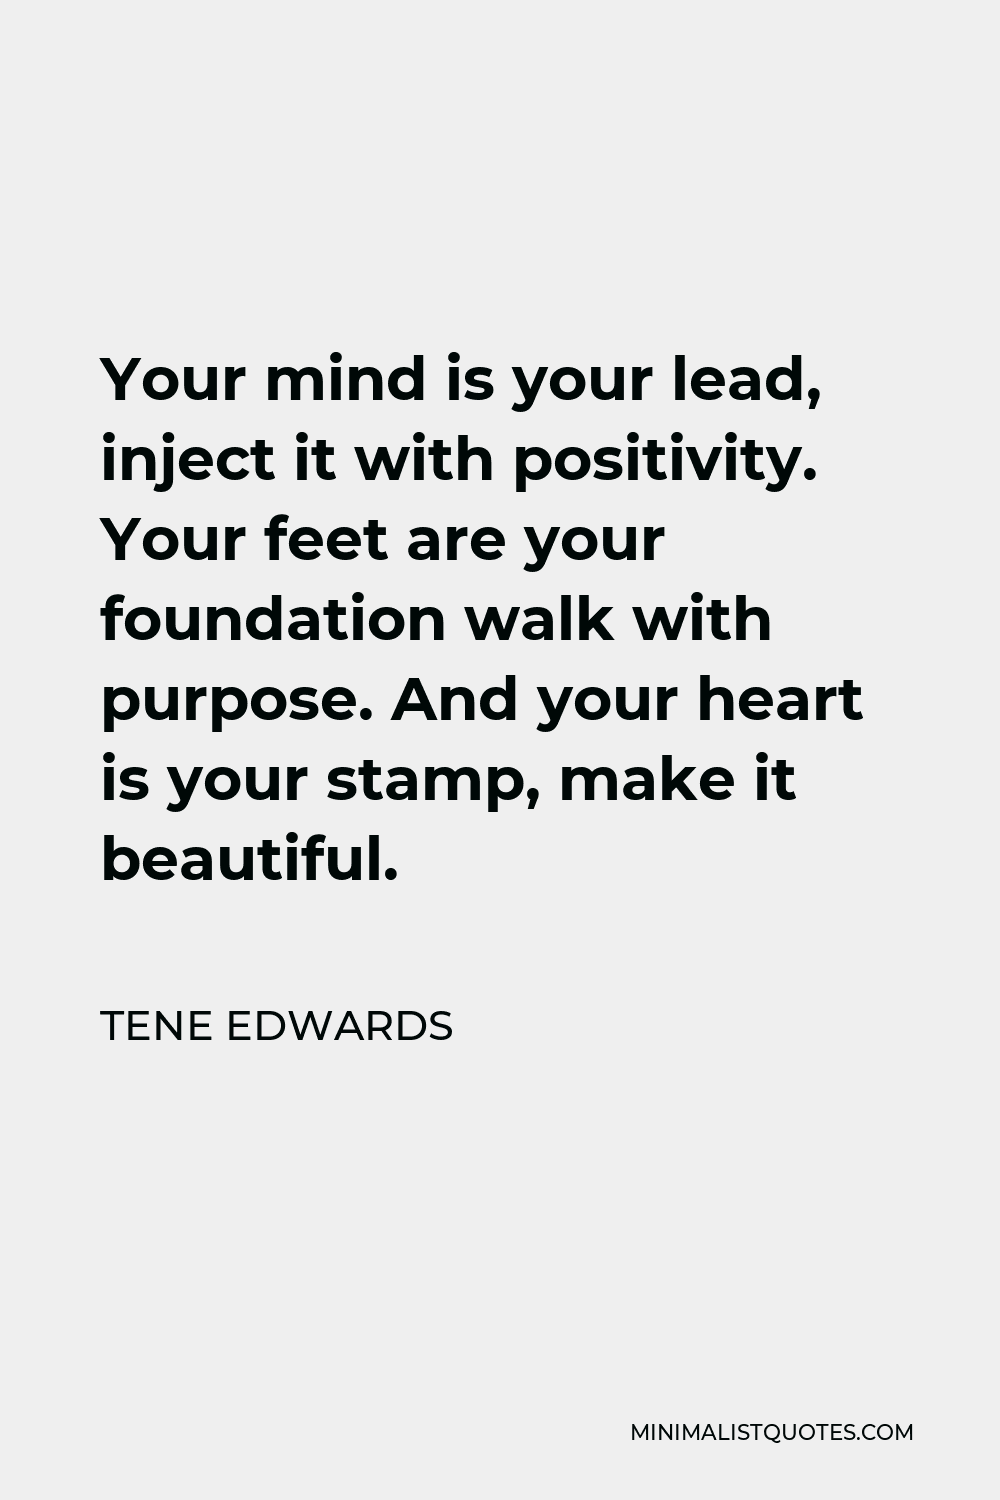 Tene Edwards Quote - Your mind is your lead, inject it with positivity. Your feet are your foundation walk with purpose. And your heart is your stamp, make it beautiful.